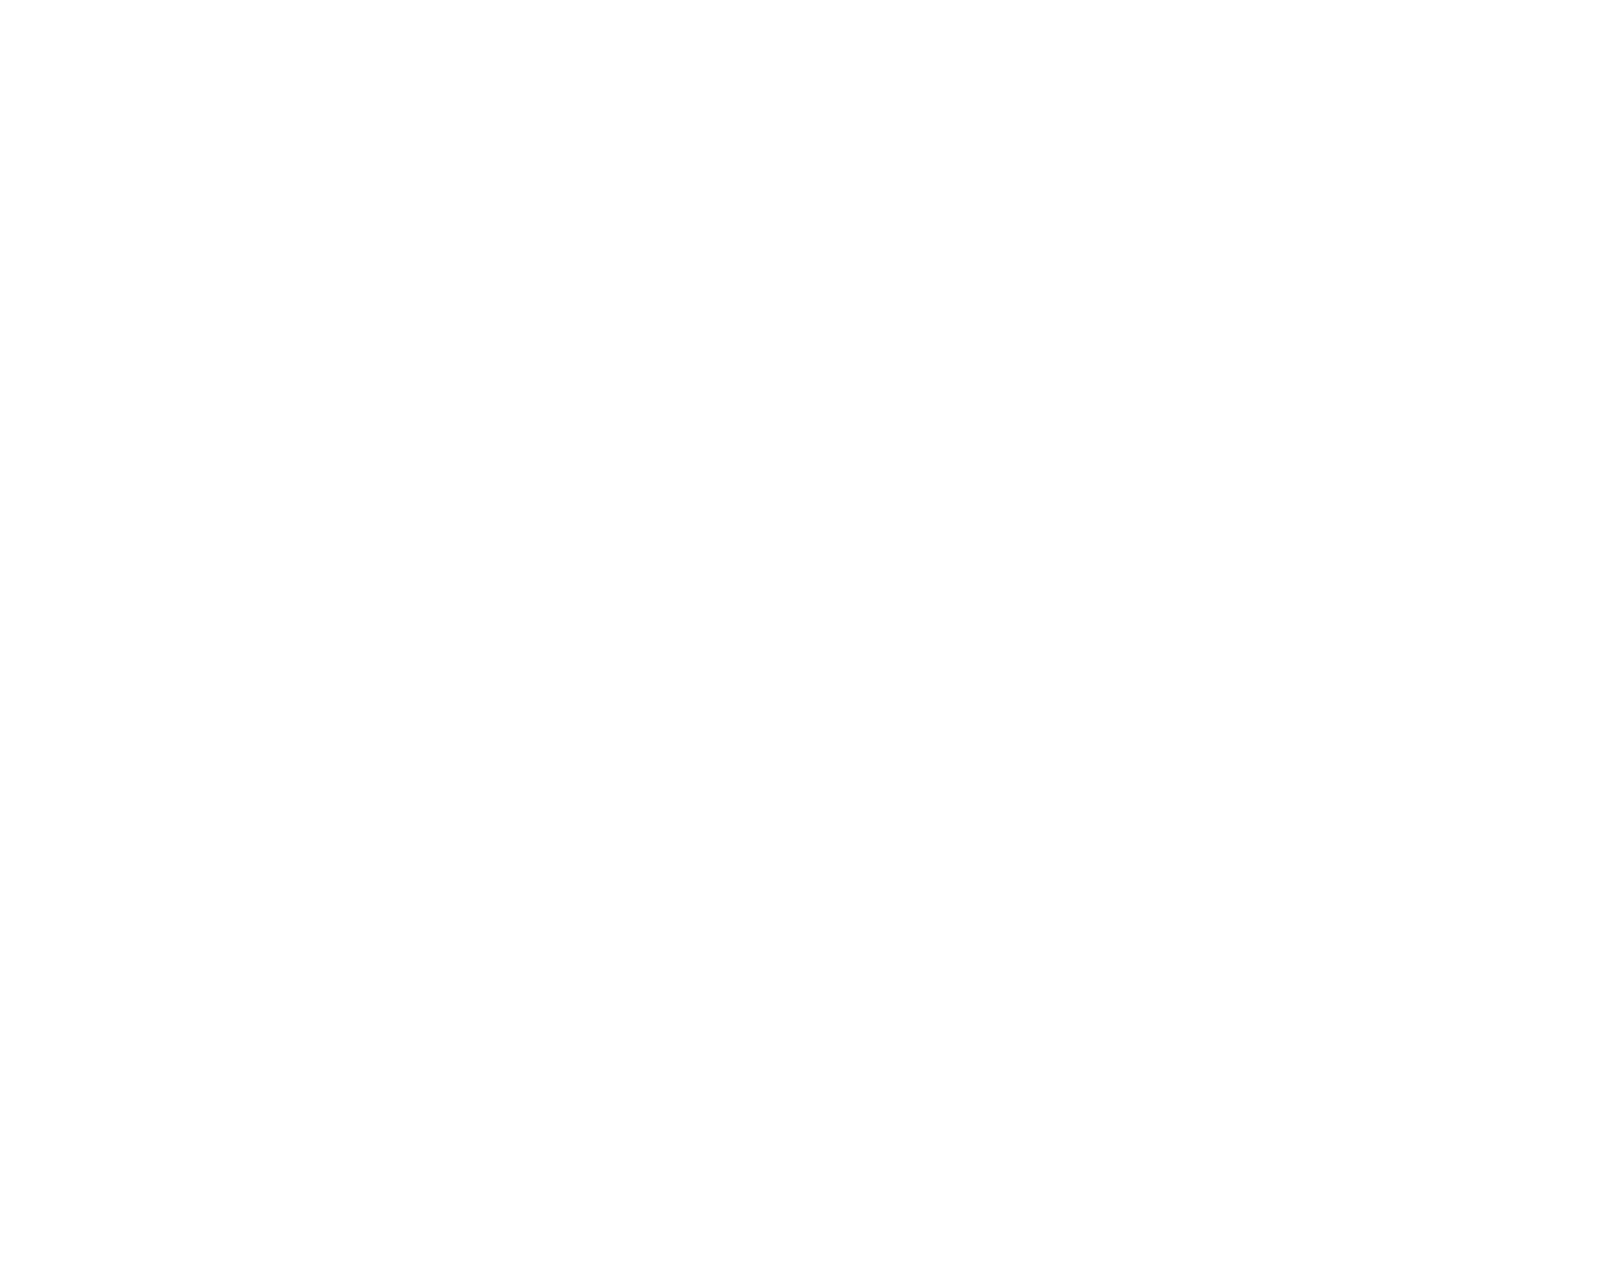 BAYVIEW POINT COMMERCIAL CENTRE_LOGO_White